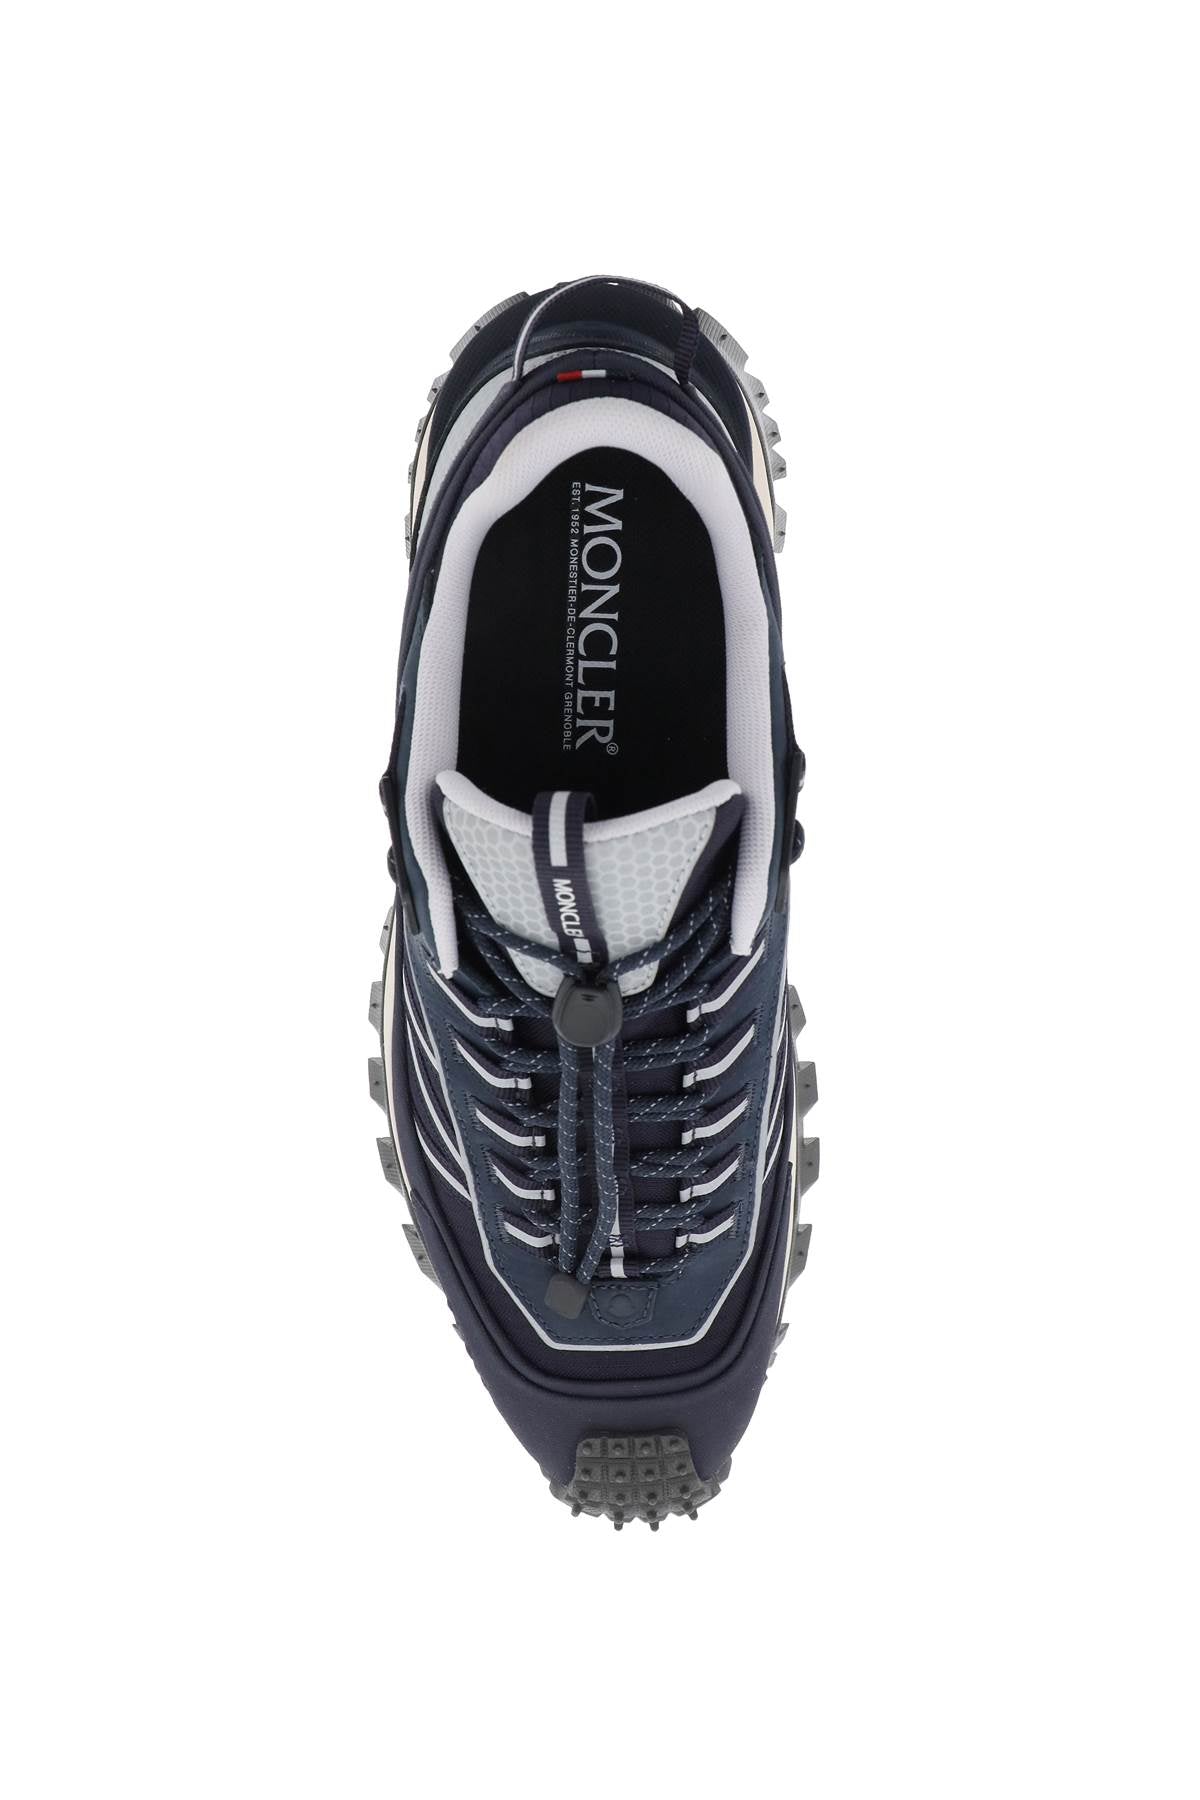 MONCLER Men's Navy Tech Ripstop Sneakers with Ribbon Details